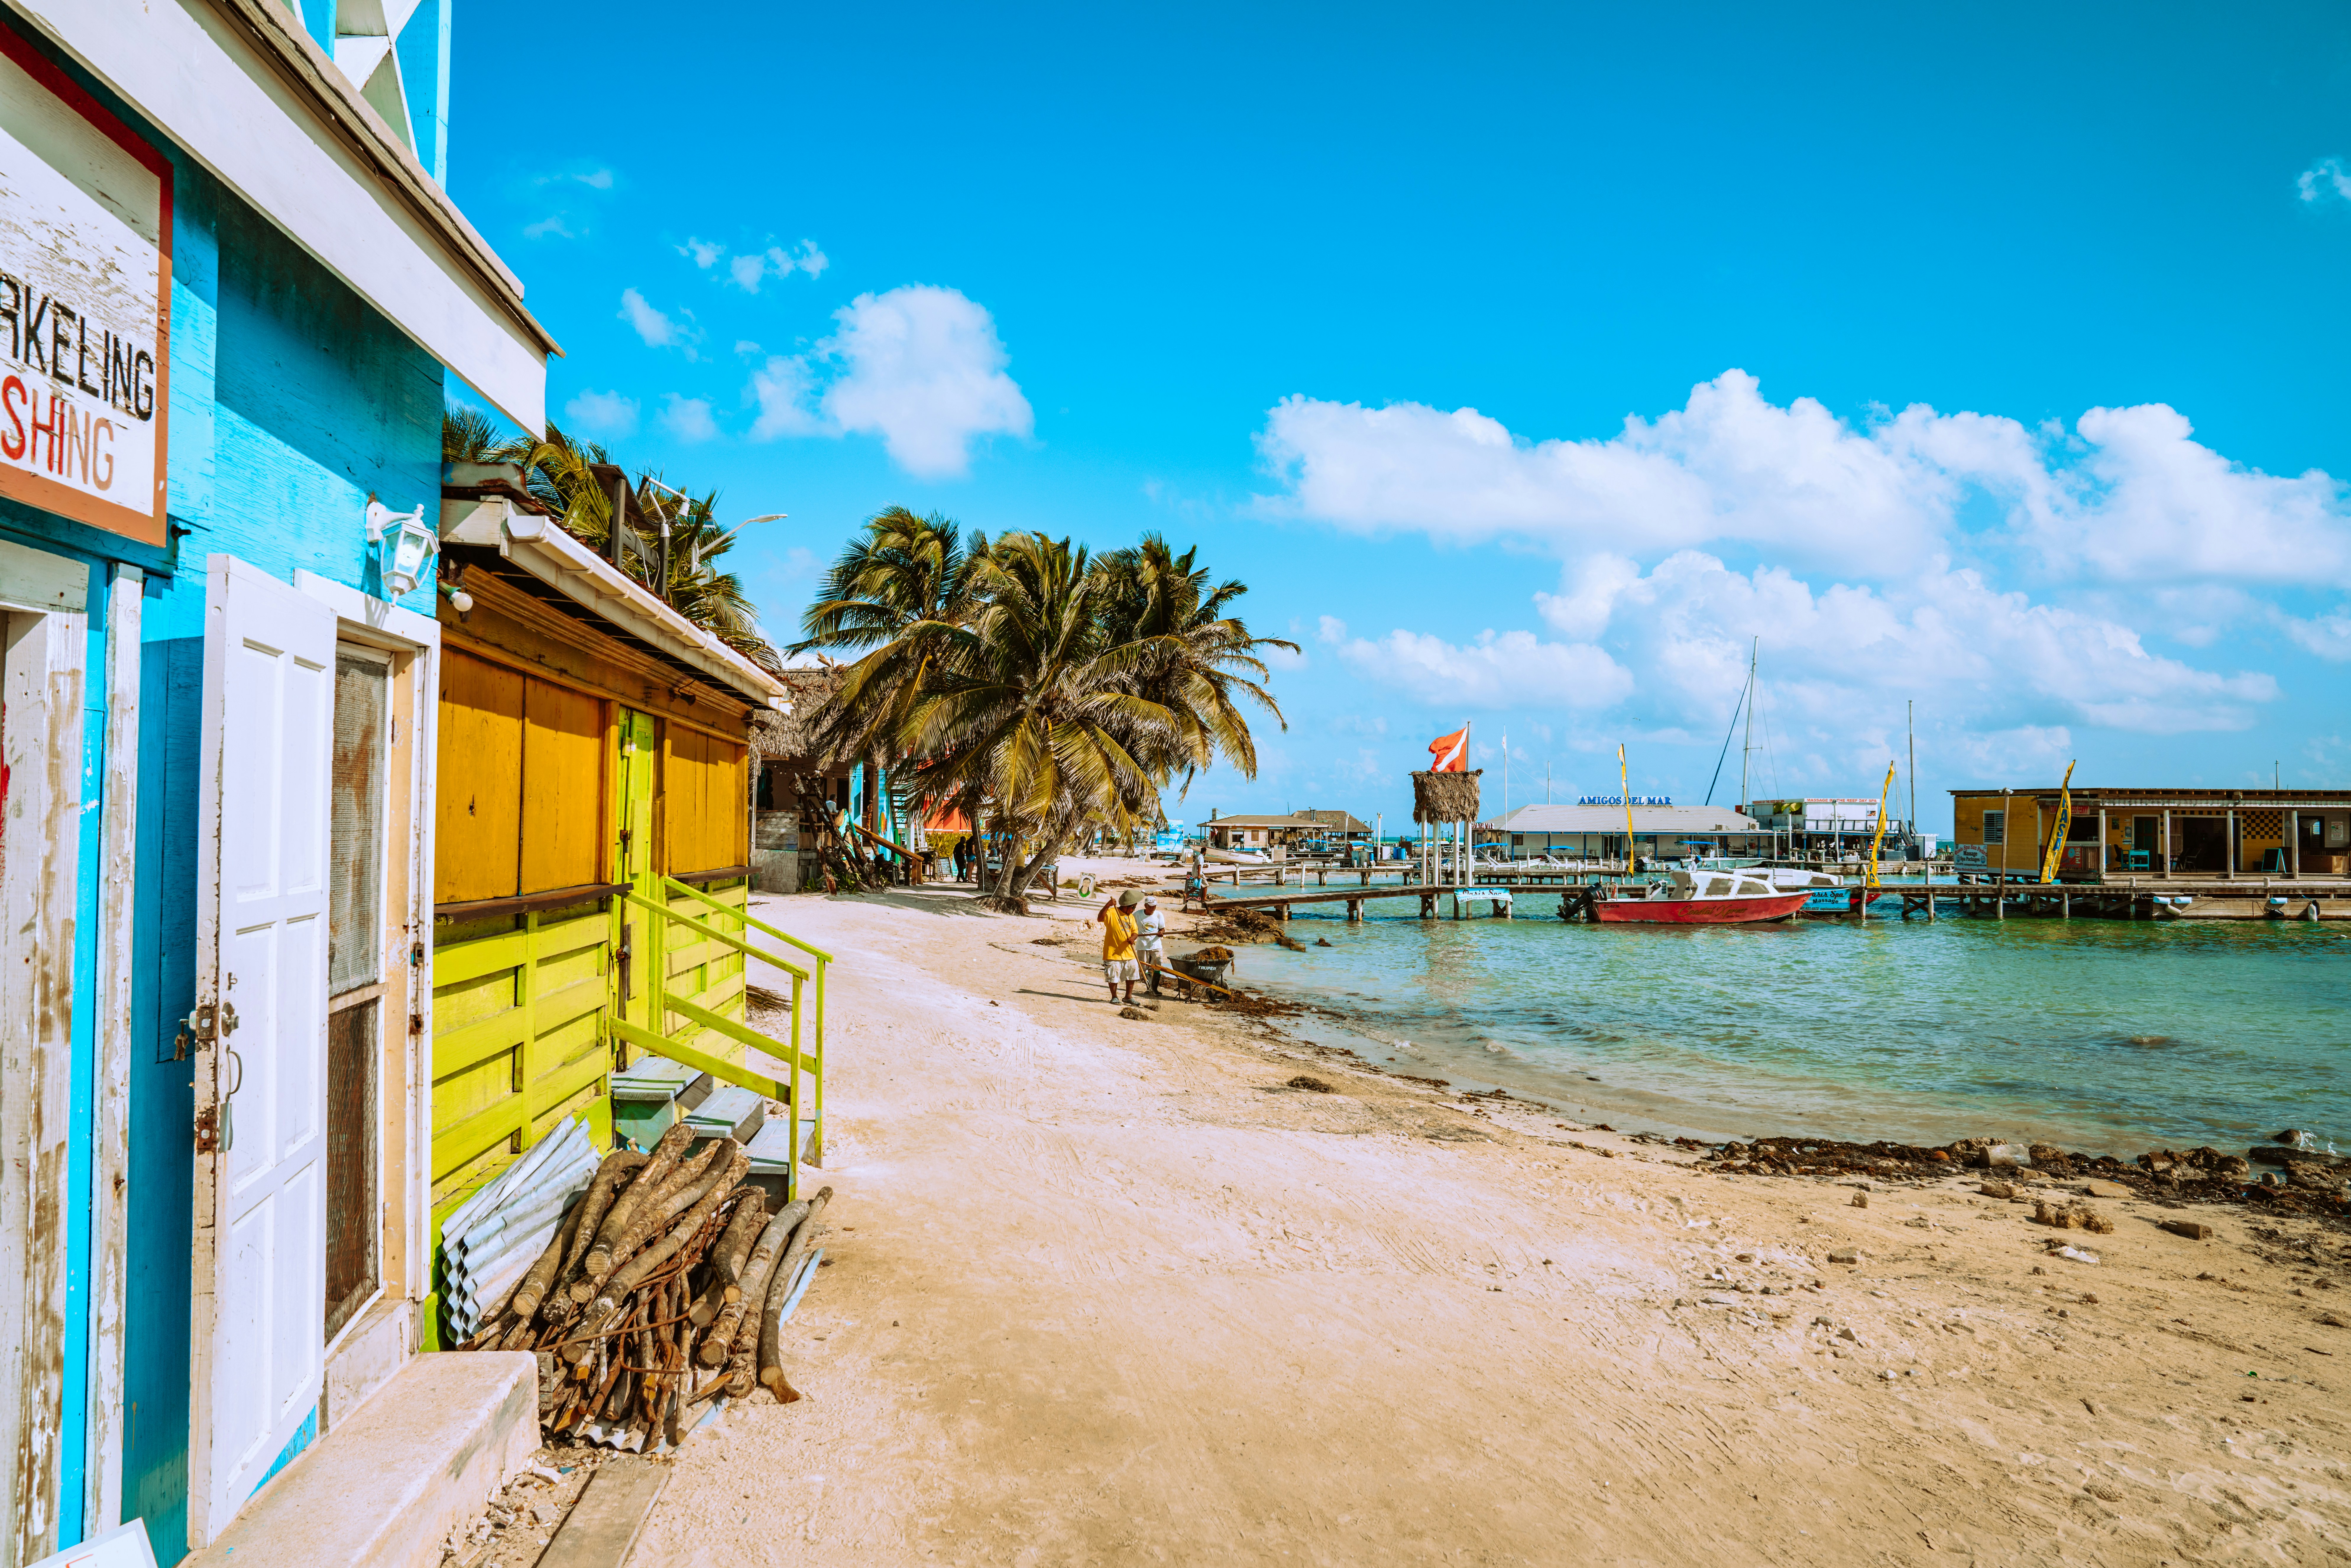 Learn more about the safety level of Belize and ways to avoid danger.
pictured: a white sand beach and turquoise waters near some tourists shops in Belize  